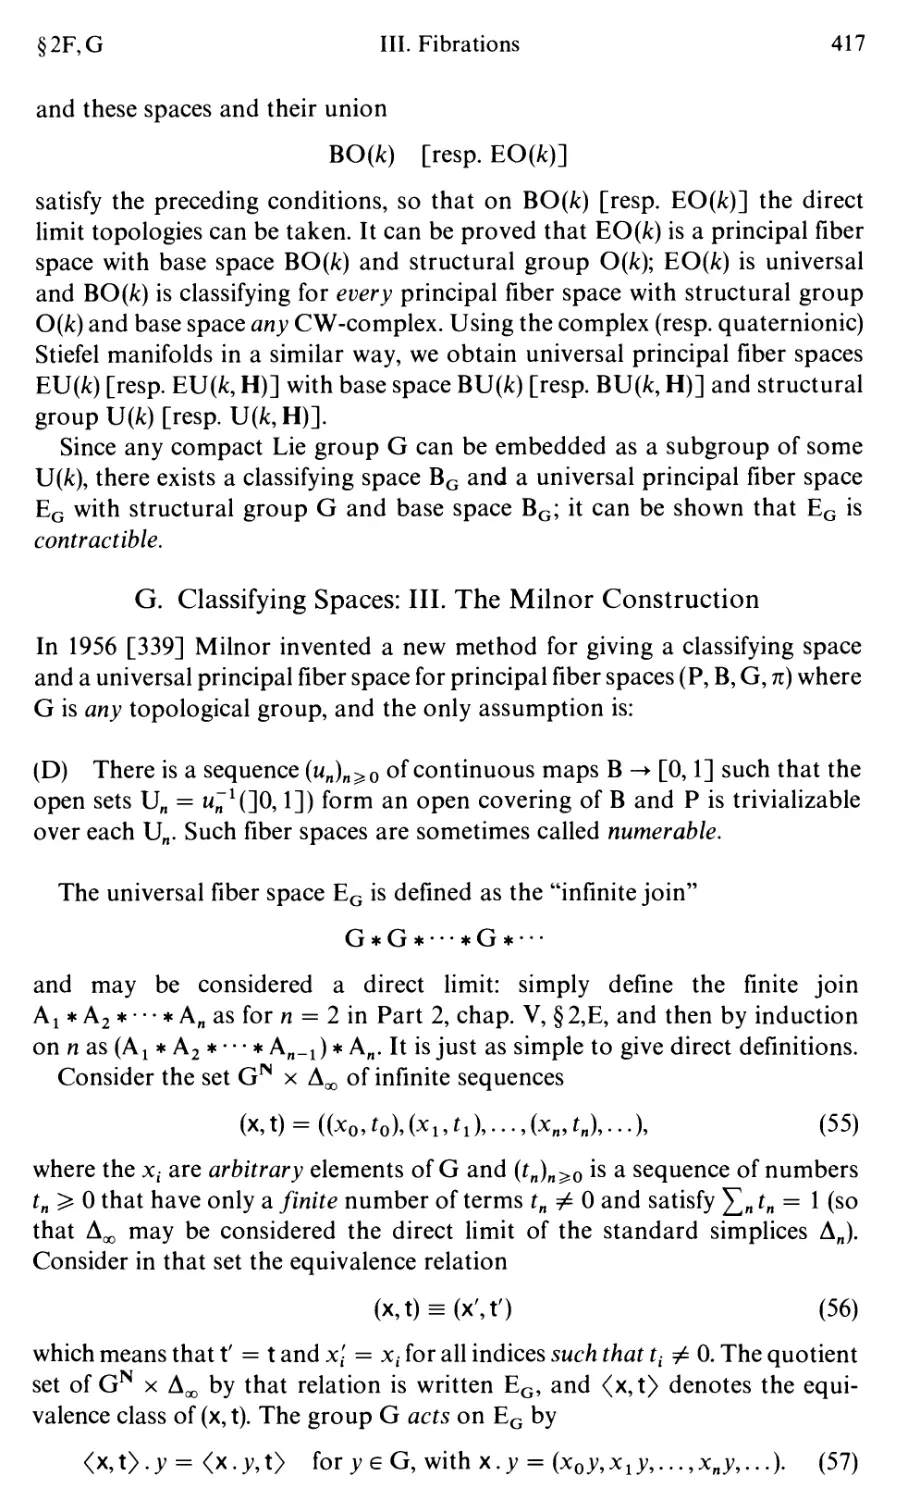 G. Classifying Spaces: III. The Milnor Construction